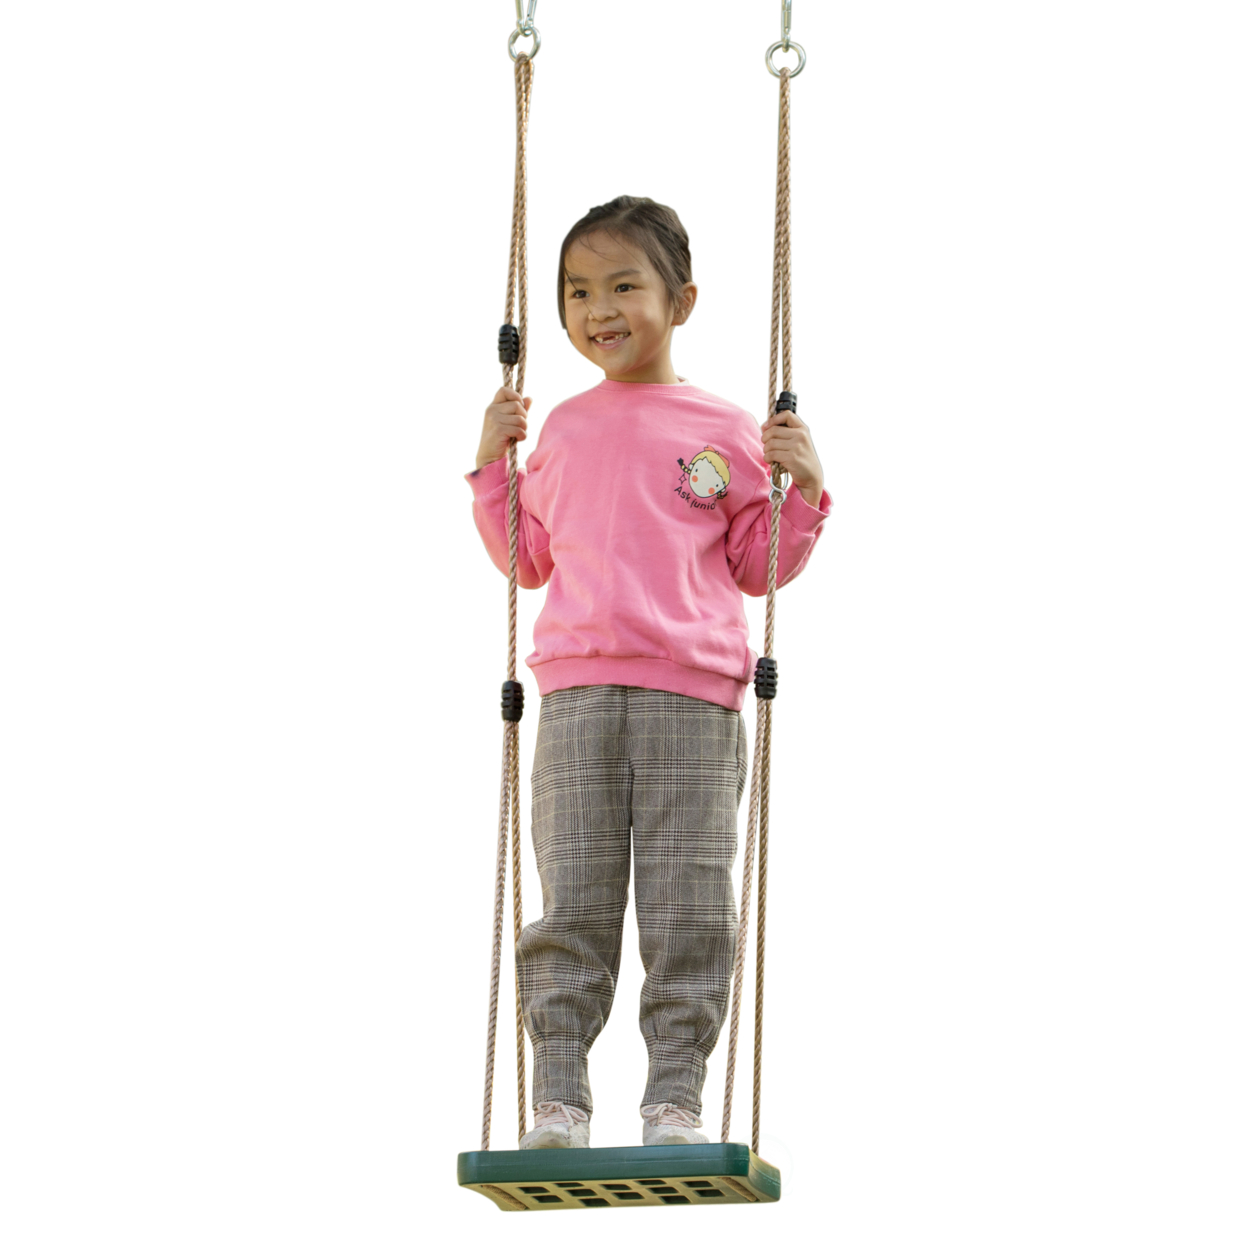 Adjustable Plastic Standing Swing, Outdoor Kids Playground Swing, For All Ages - Green